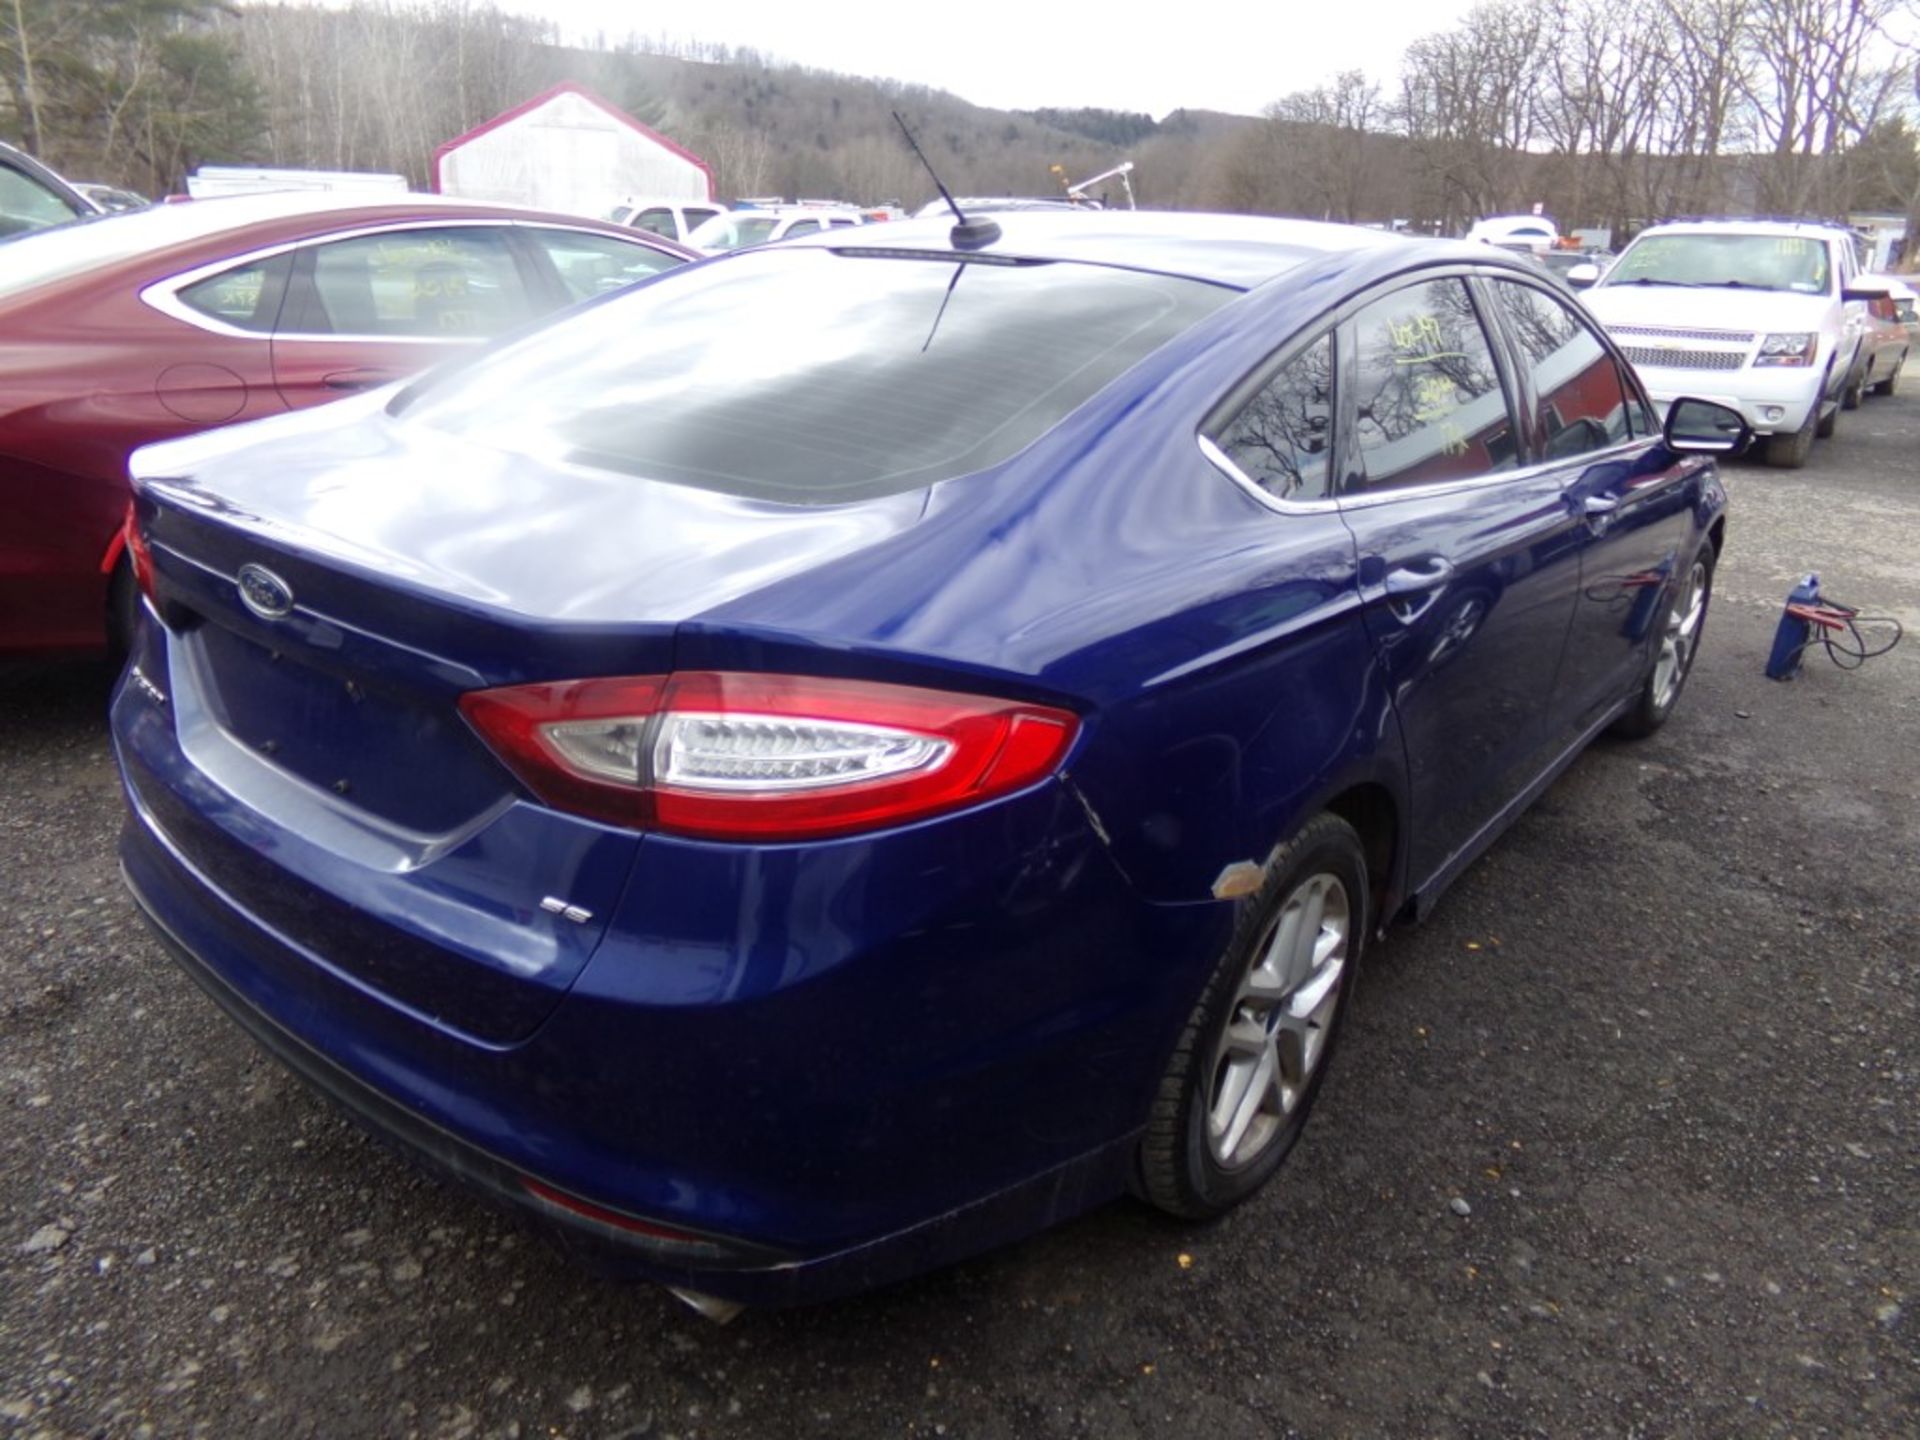 2014 Ford Fusion SE, Blue, 174,739 Miles, VIN#1FA6P0H7XE5365423, AIR BAG LIGHT IS ON, MINOR DAMAGE - Image 6 of 18